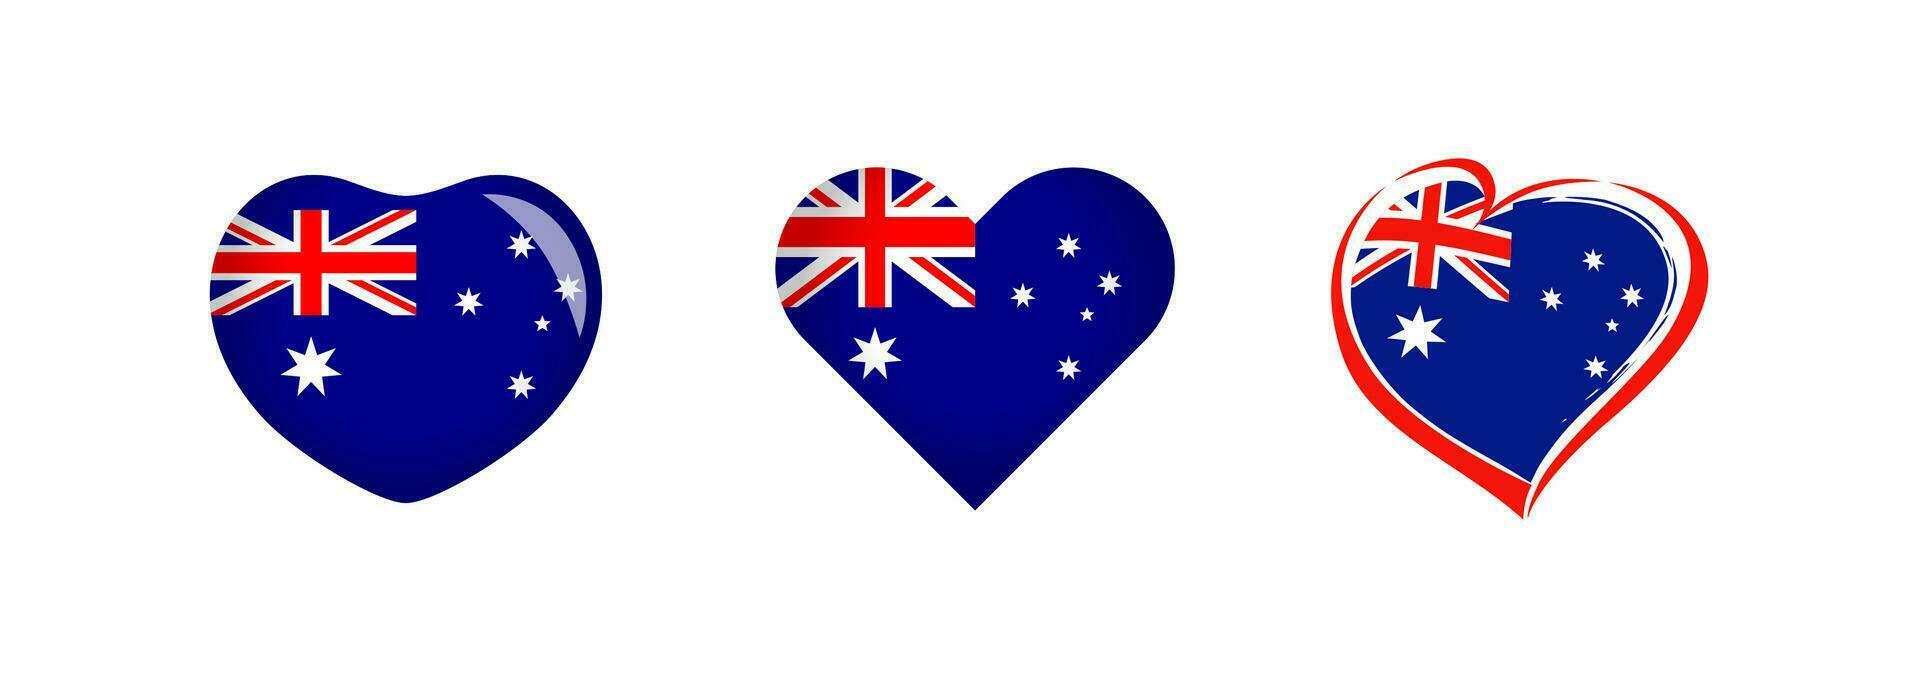 Heart shapes with Australian flag. Creative collection. Set of buttons. Icon concept. Happy Australia day decoration. Welcome to Australia, welcome to Sydney sign. Sports or travel logo design. vector